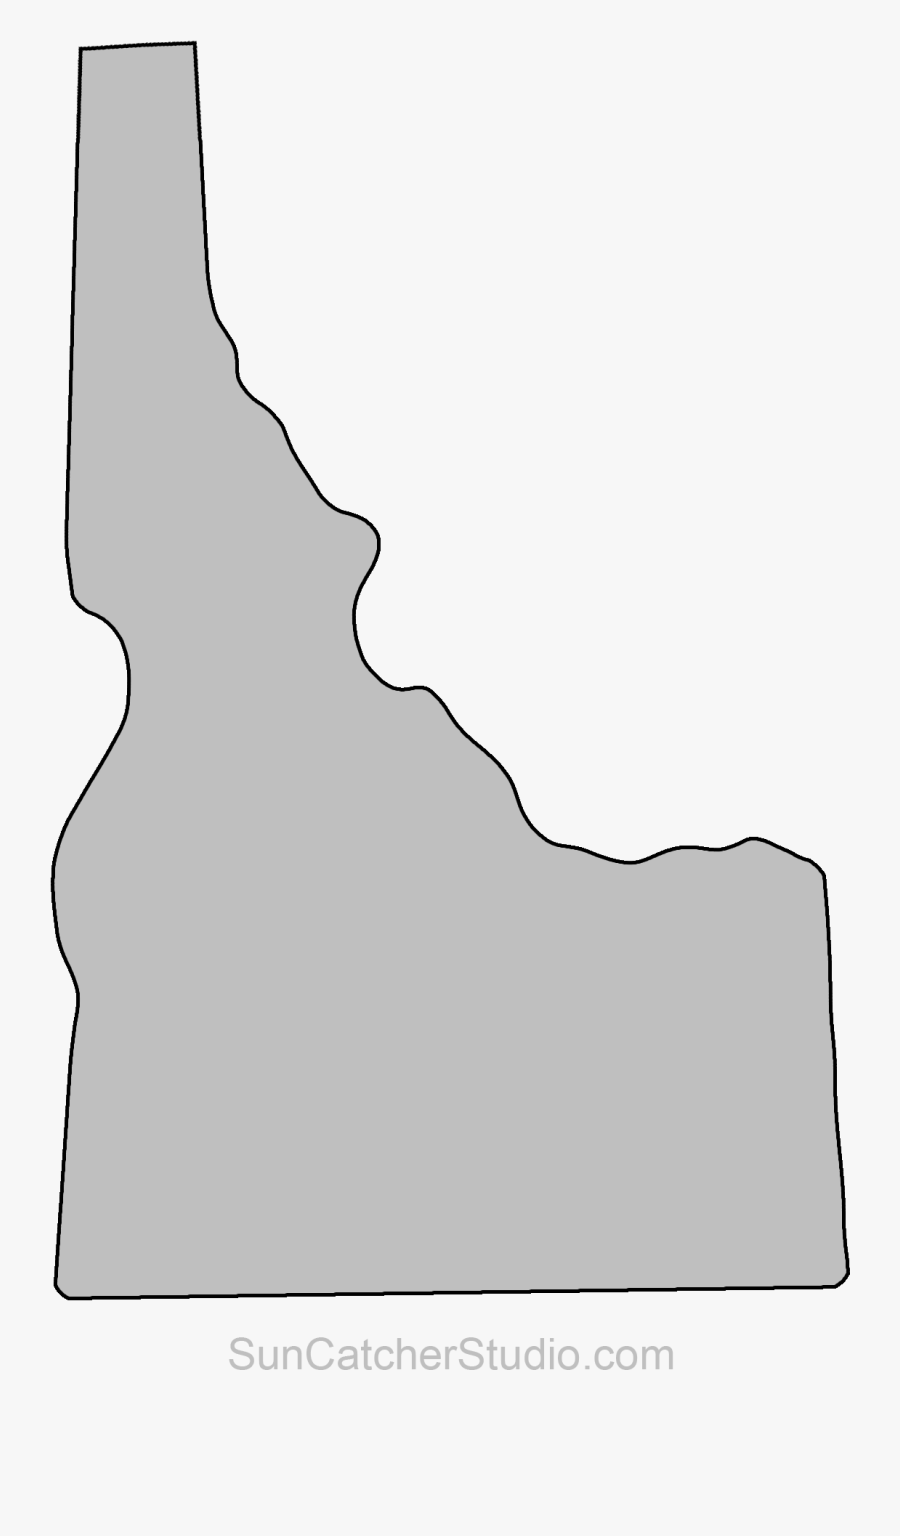 Idaho State Outline Png, Transparent Clipart